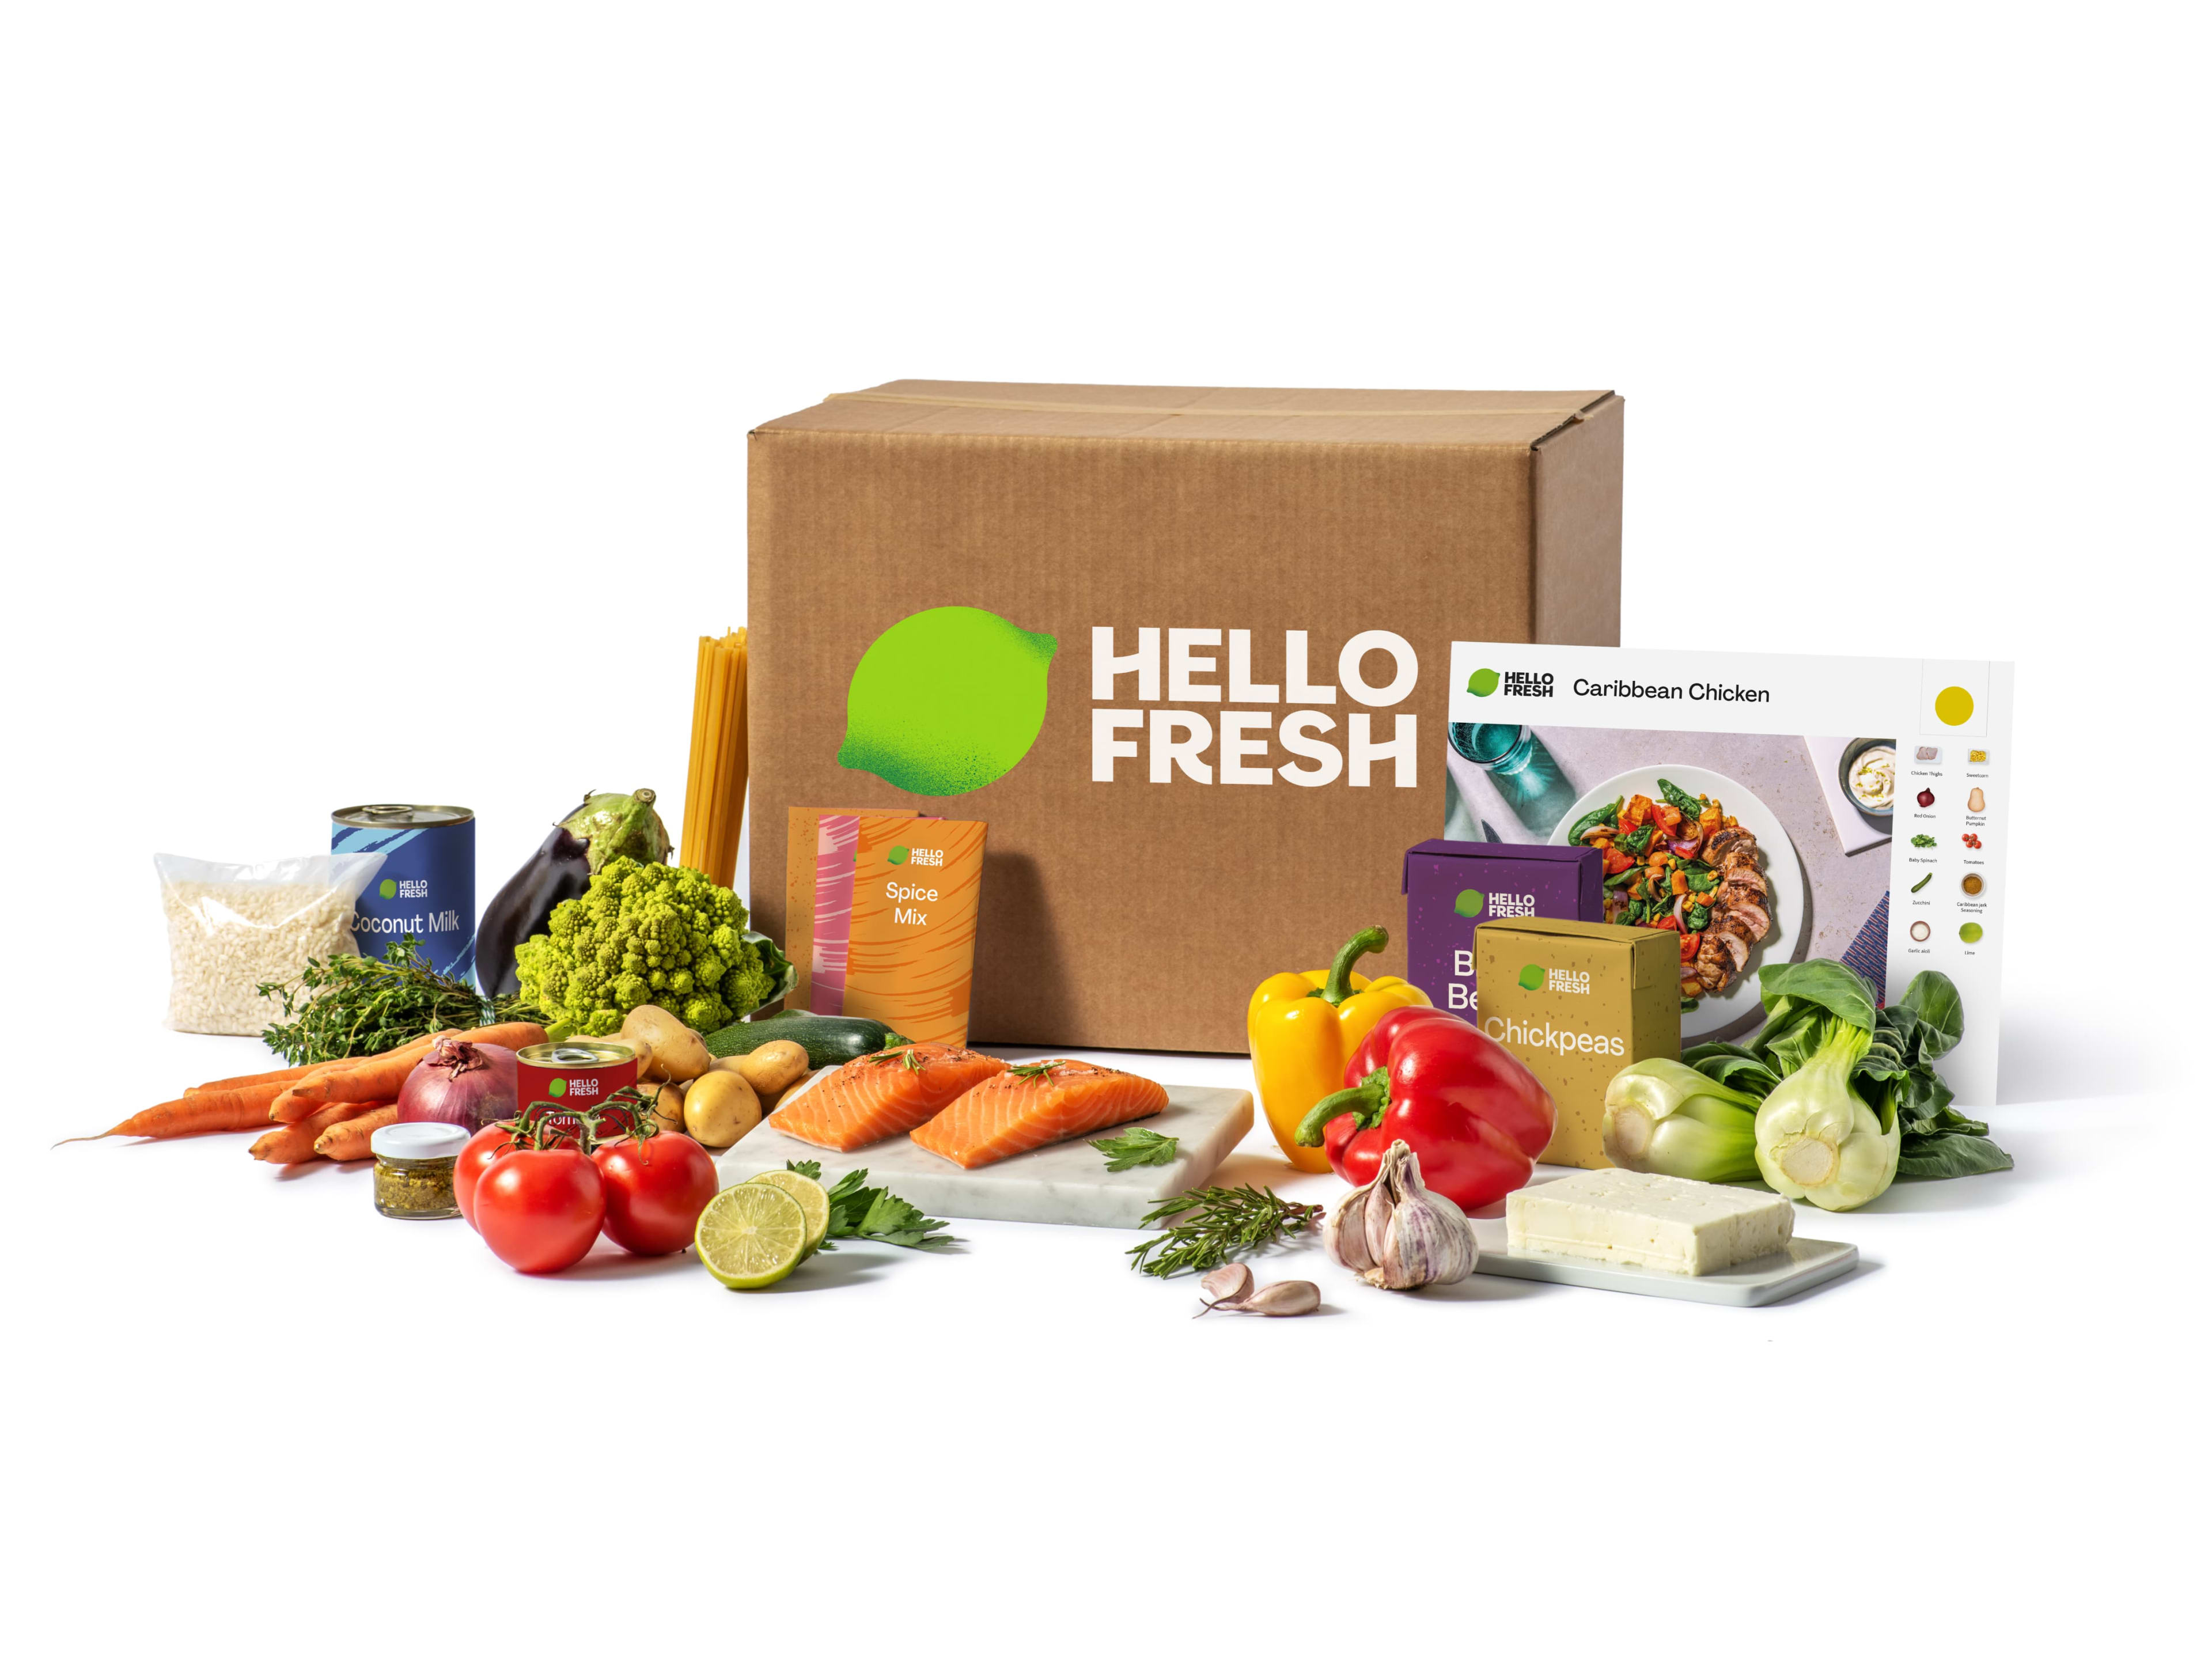 Meal kits for lunch catered to your needs